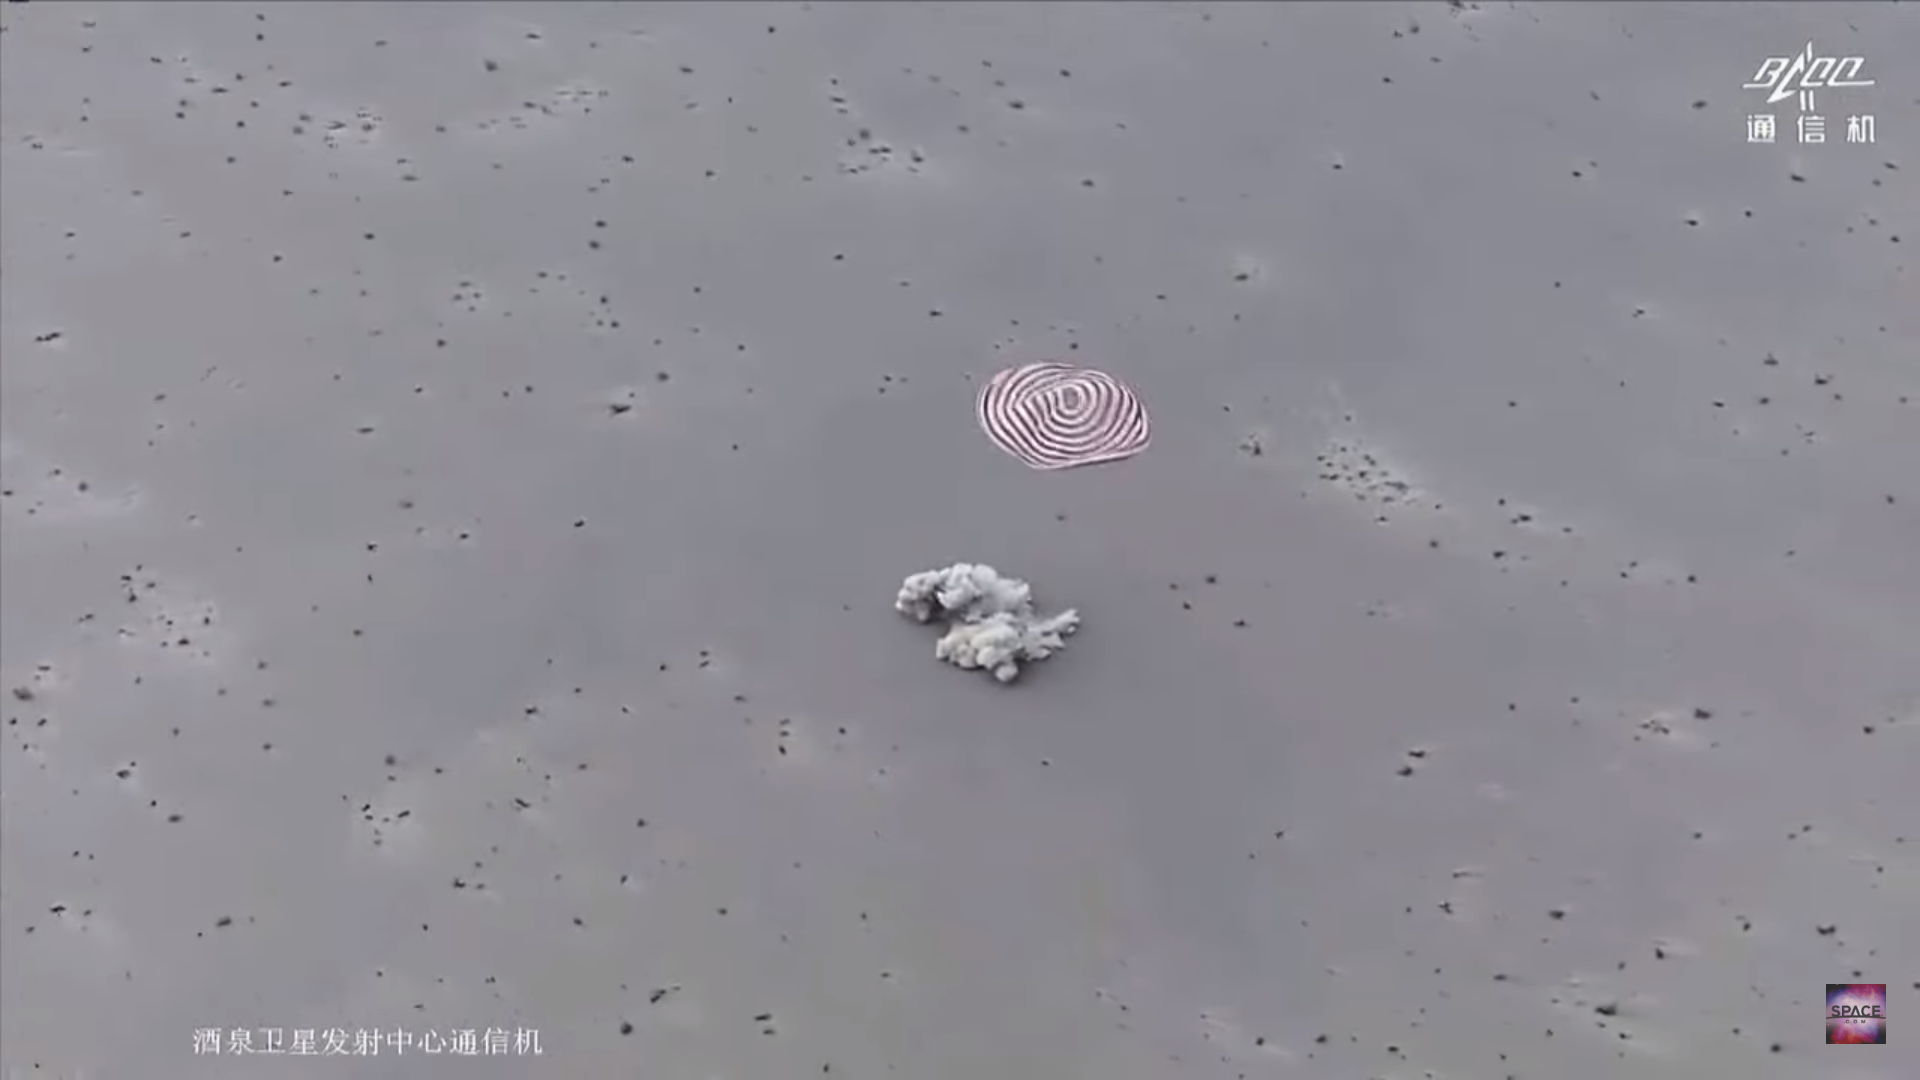 Chinese space capsule kicking up a dust cloud while landing as its parachute drifts to Earth.